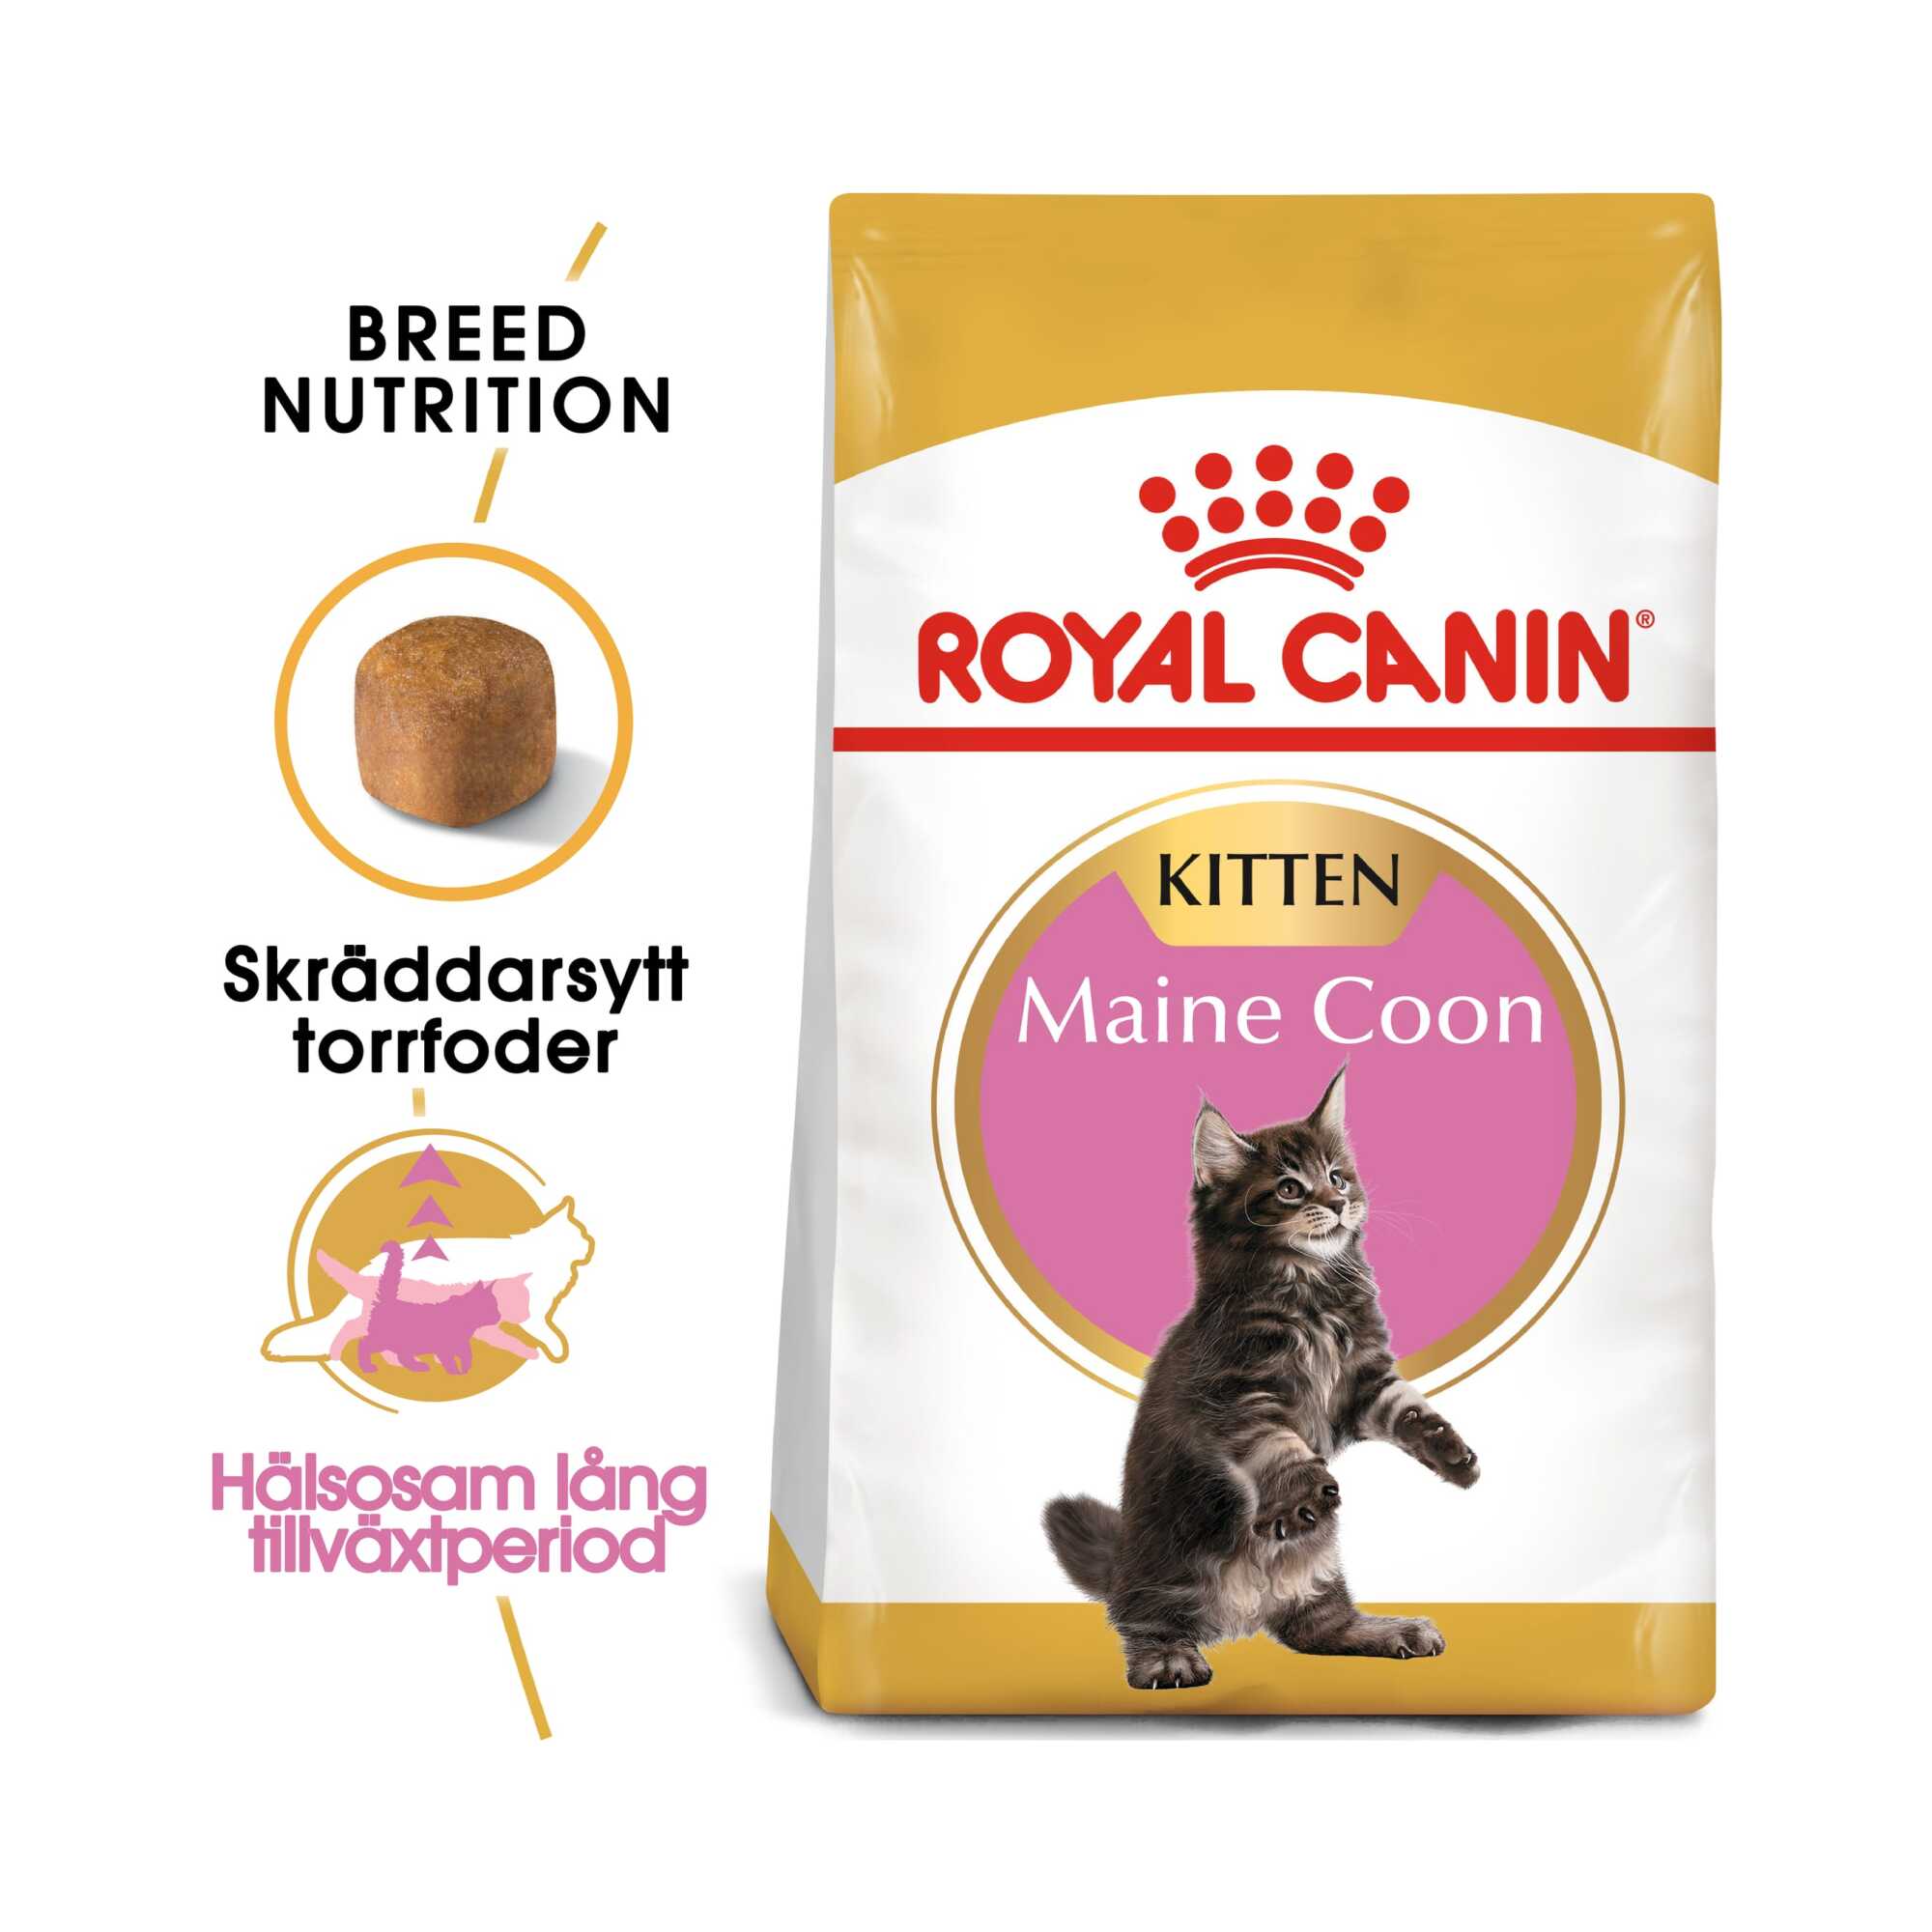 Buy Royal Canin Maine Kitten for your dog cat Tinybuddy